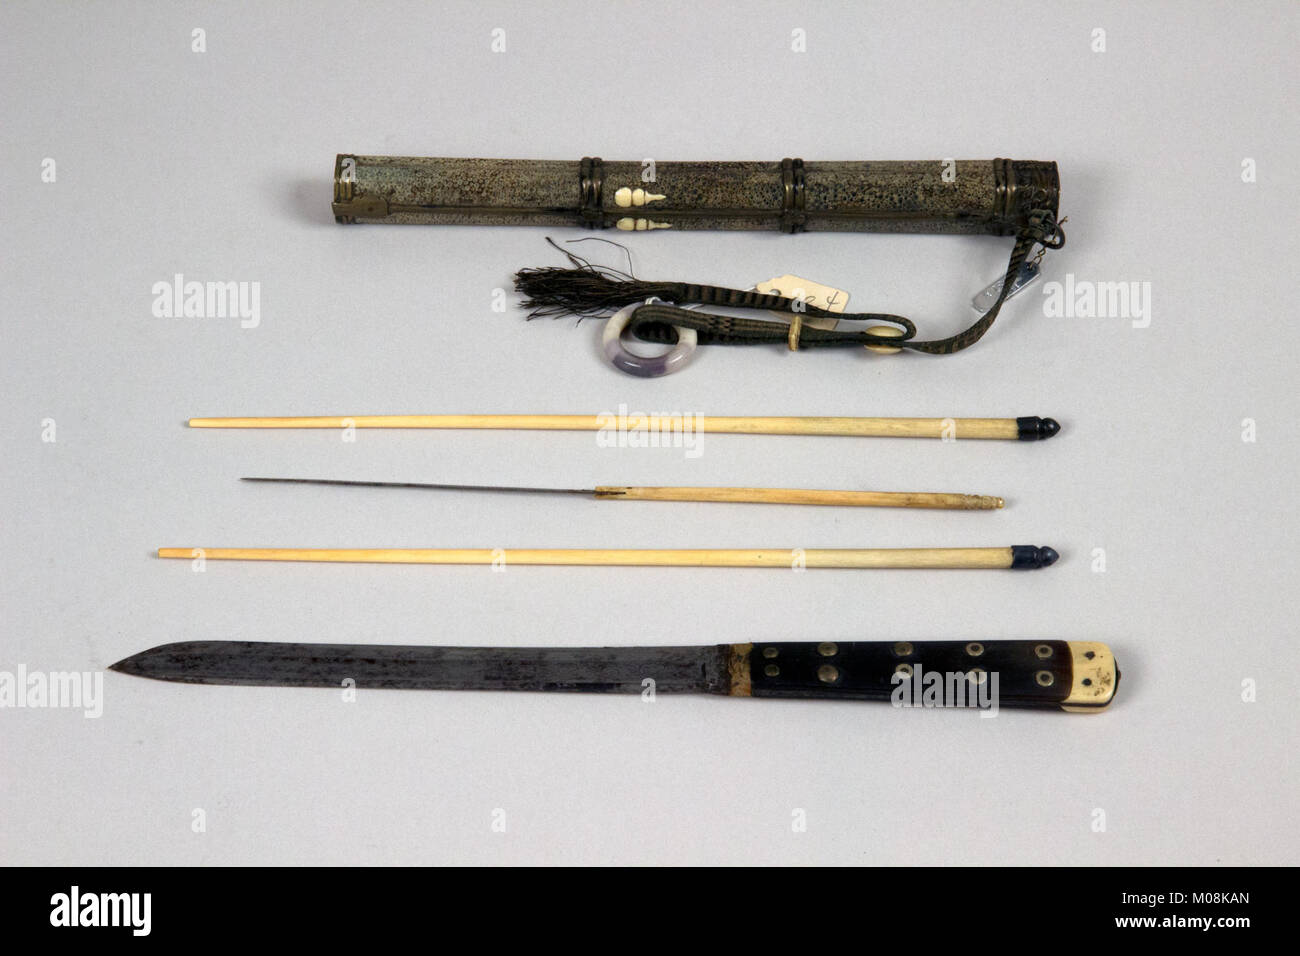 Knife with Sheath, Chopsticks, Pickle Spear and Toothpicks MET 36.25.987a-h 001July2014 Stock Photo